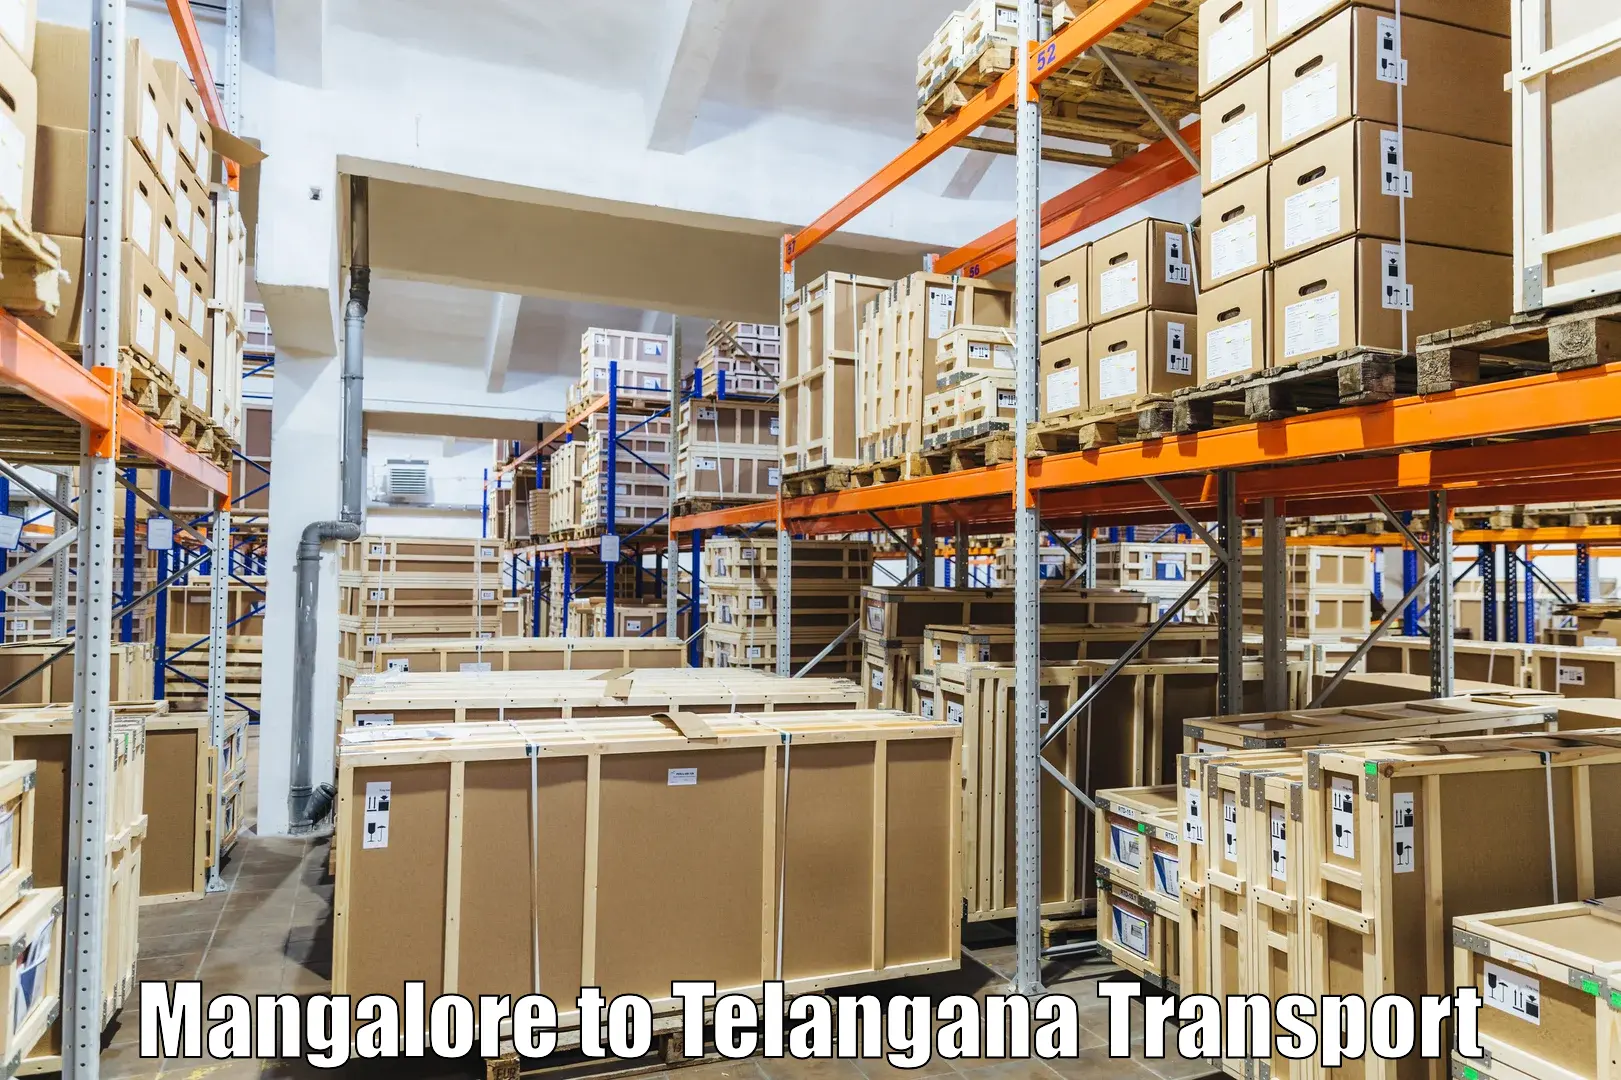 Truck transport companies in India Mangalore to Wyra